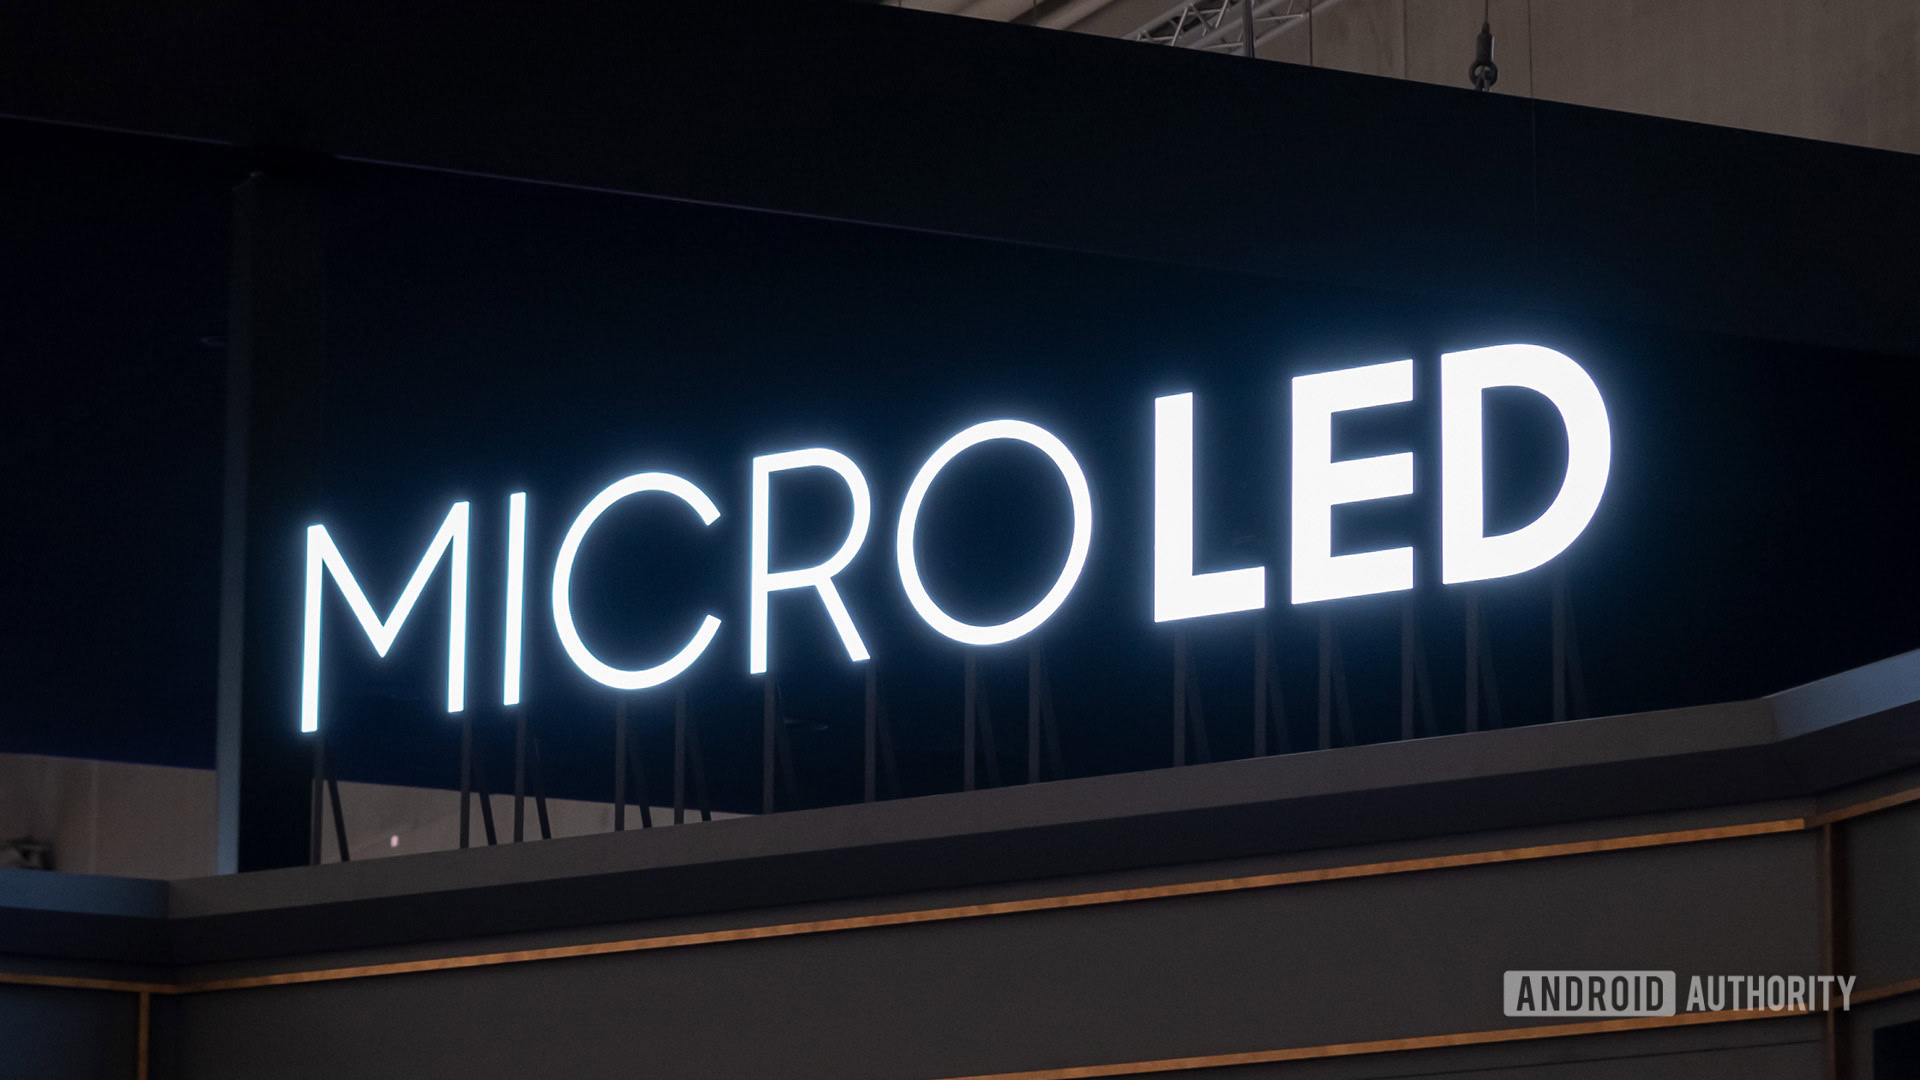 Micro-LED vs. Mini-LED: What's the difference?